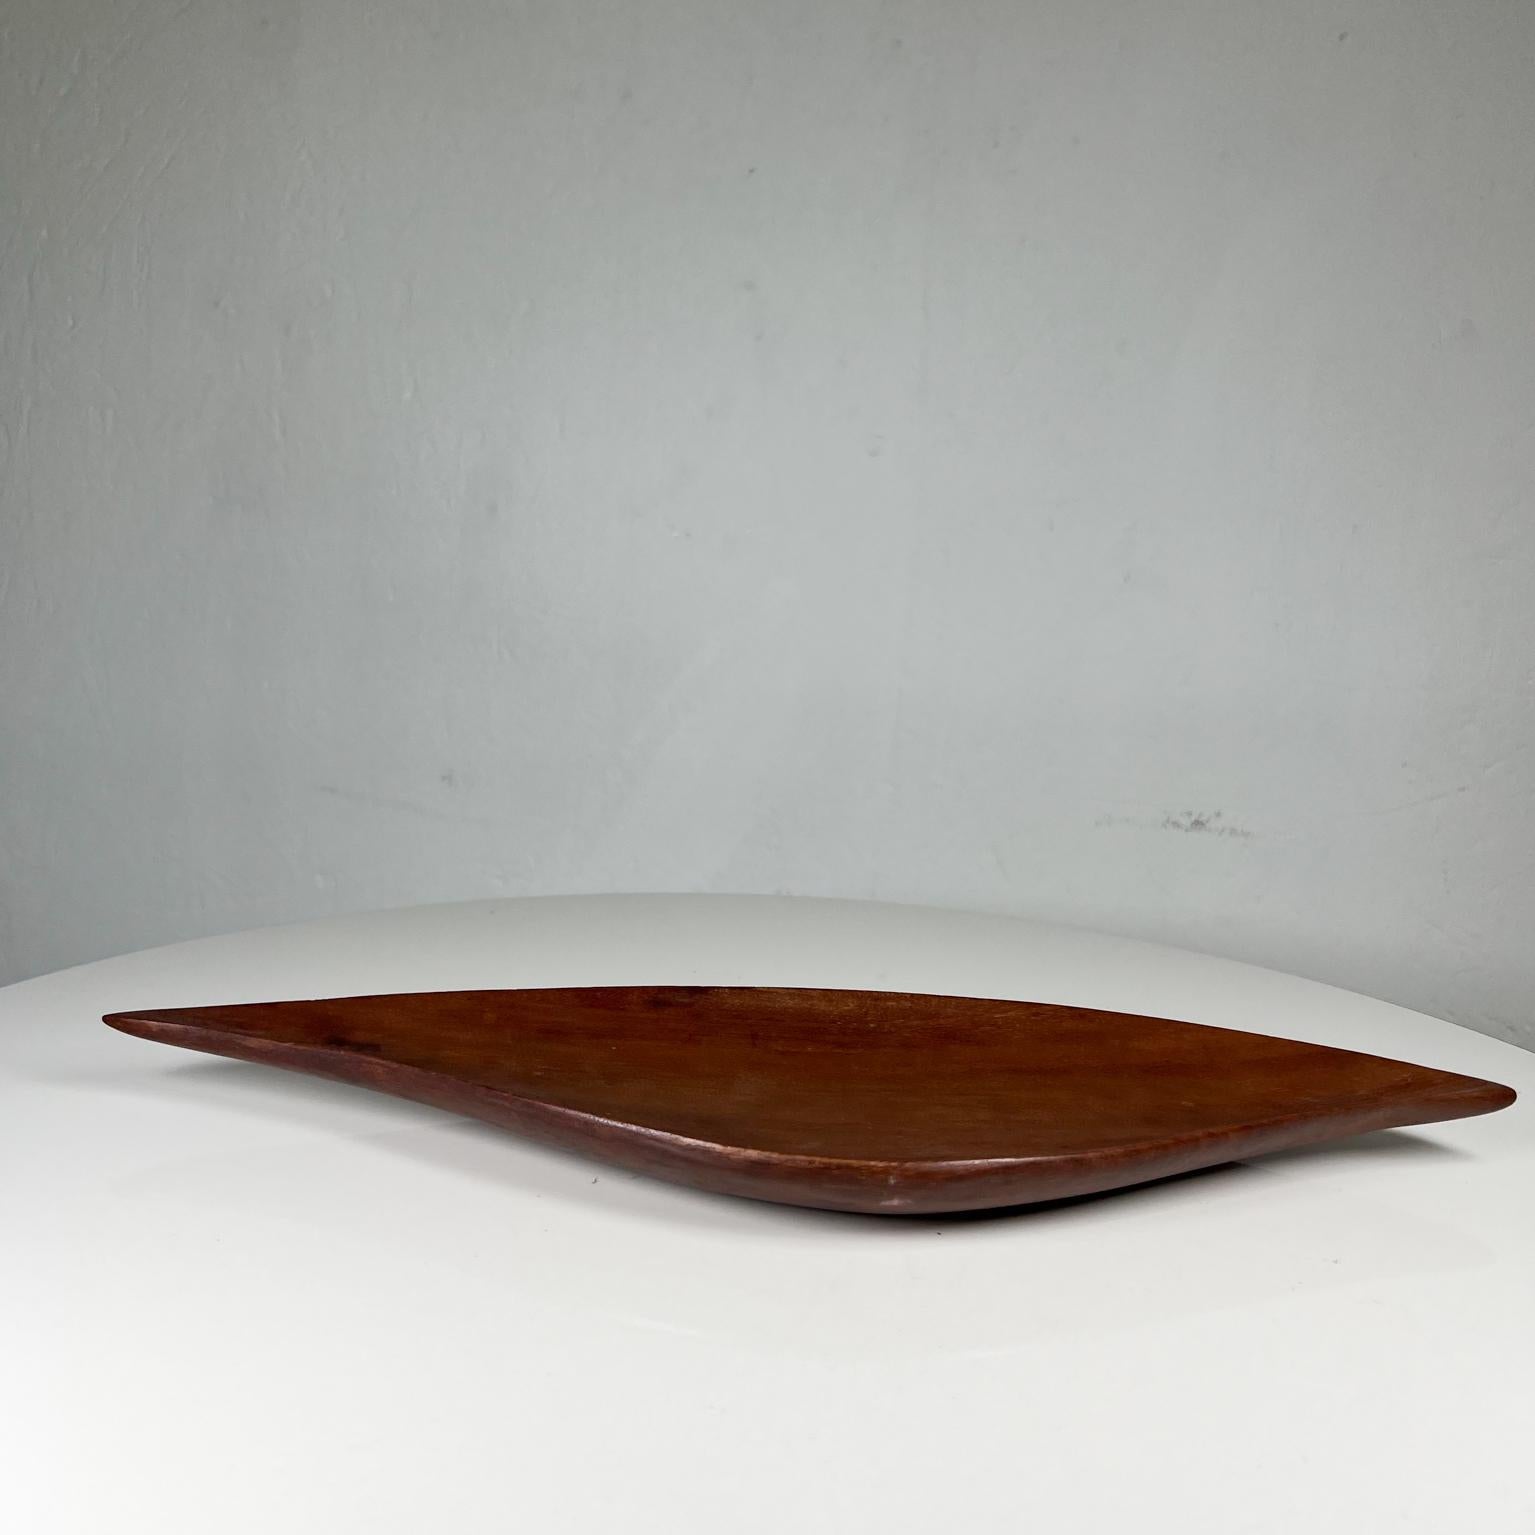 1970s Modern Haiti Sculptural Tray Wood Serving Dish Organic Form In Good Condition For Sale In Chula Vista, CA